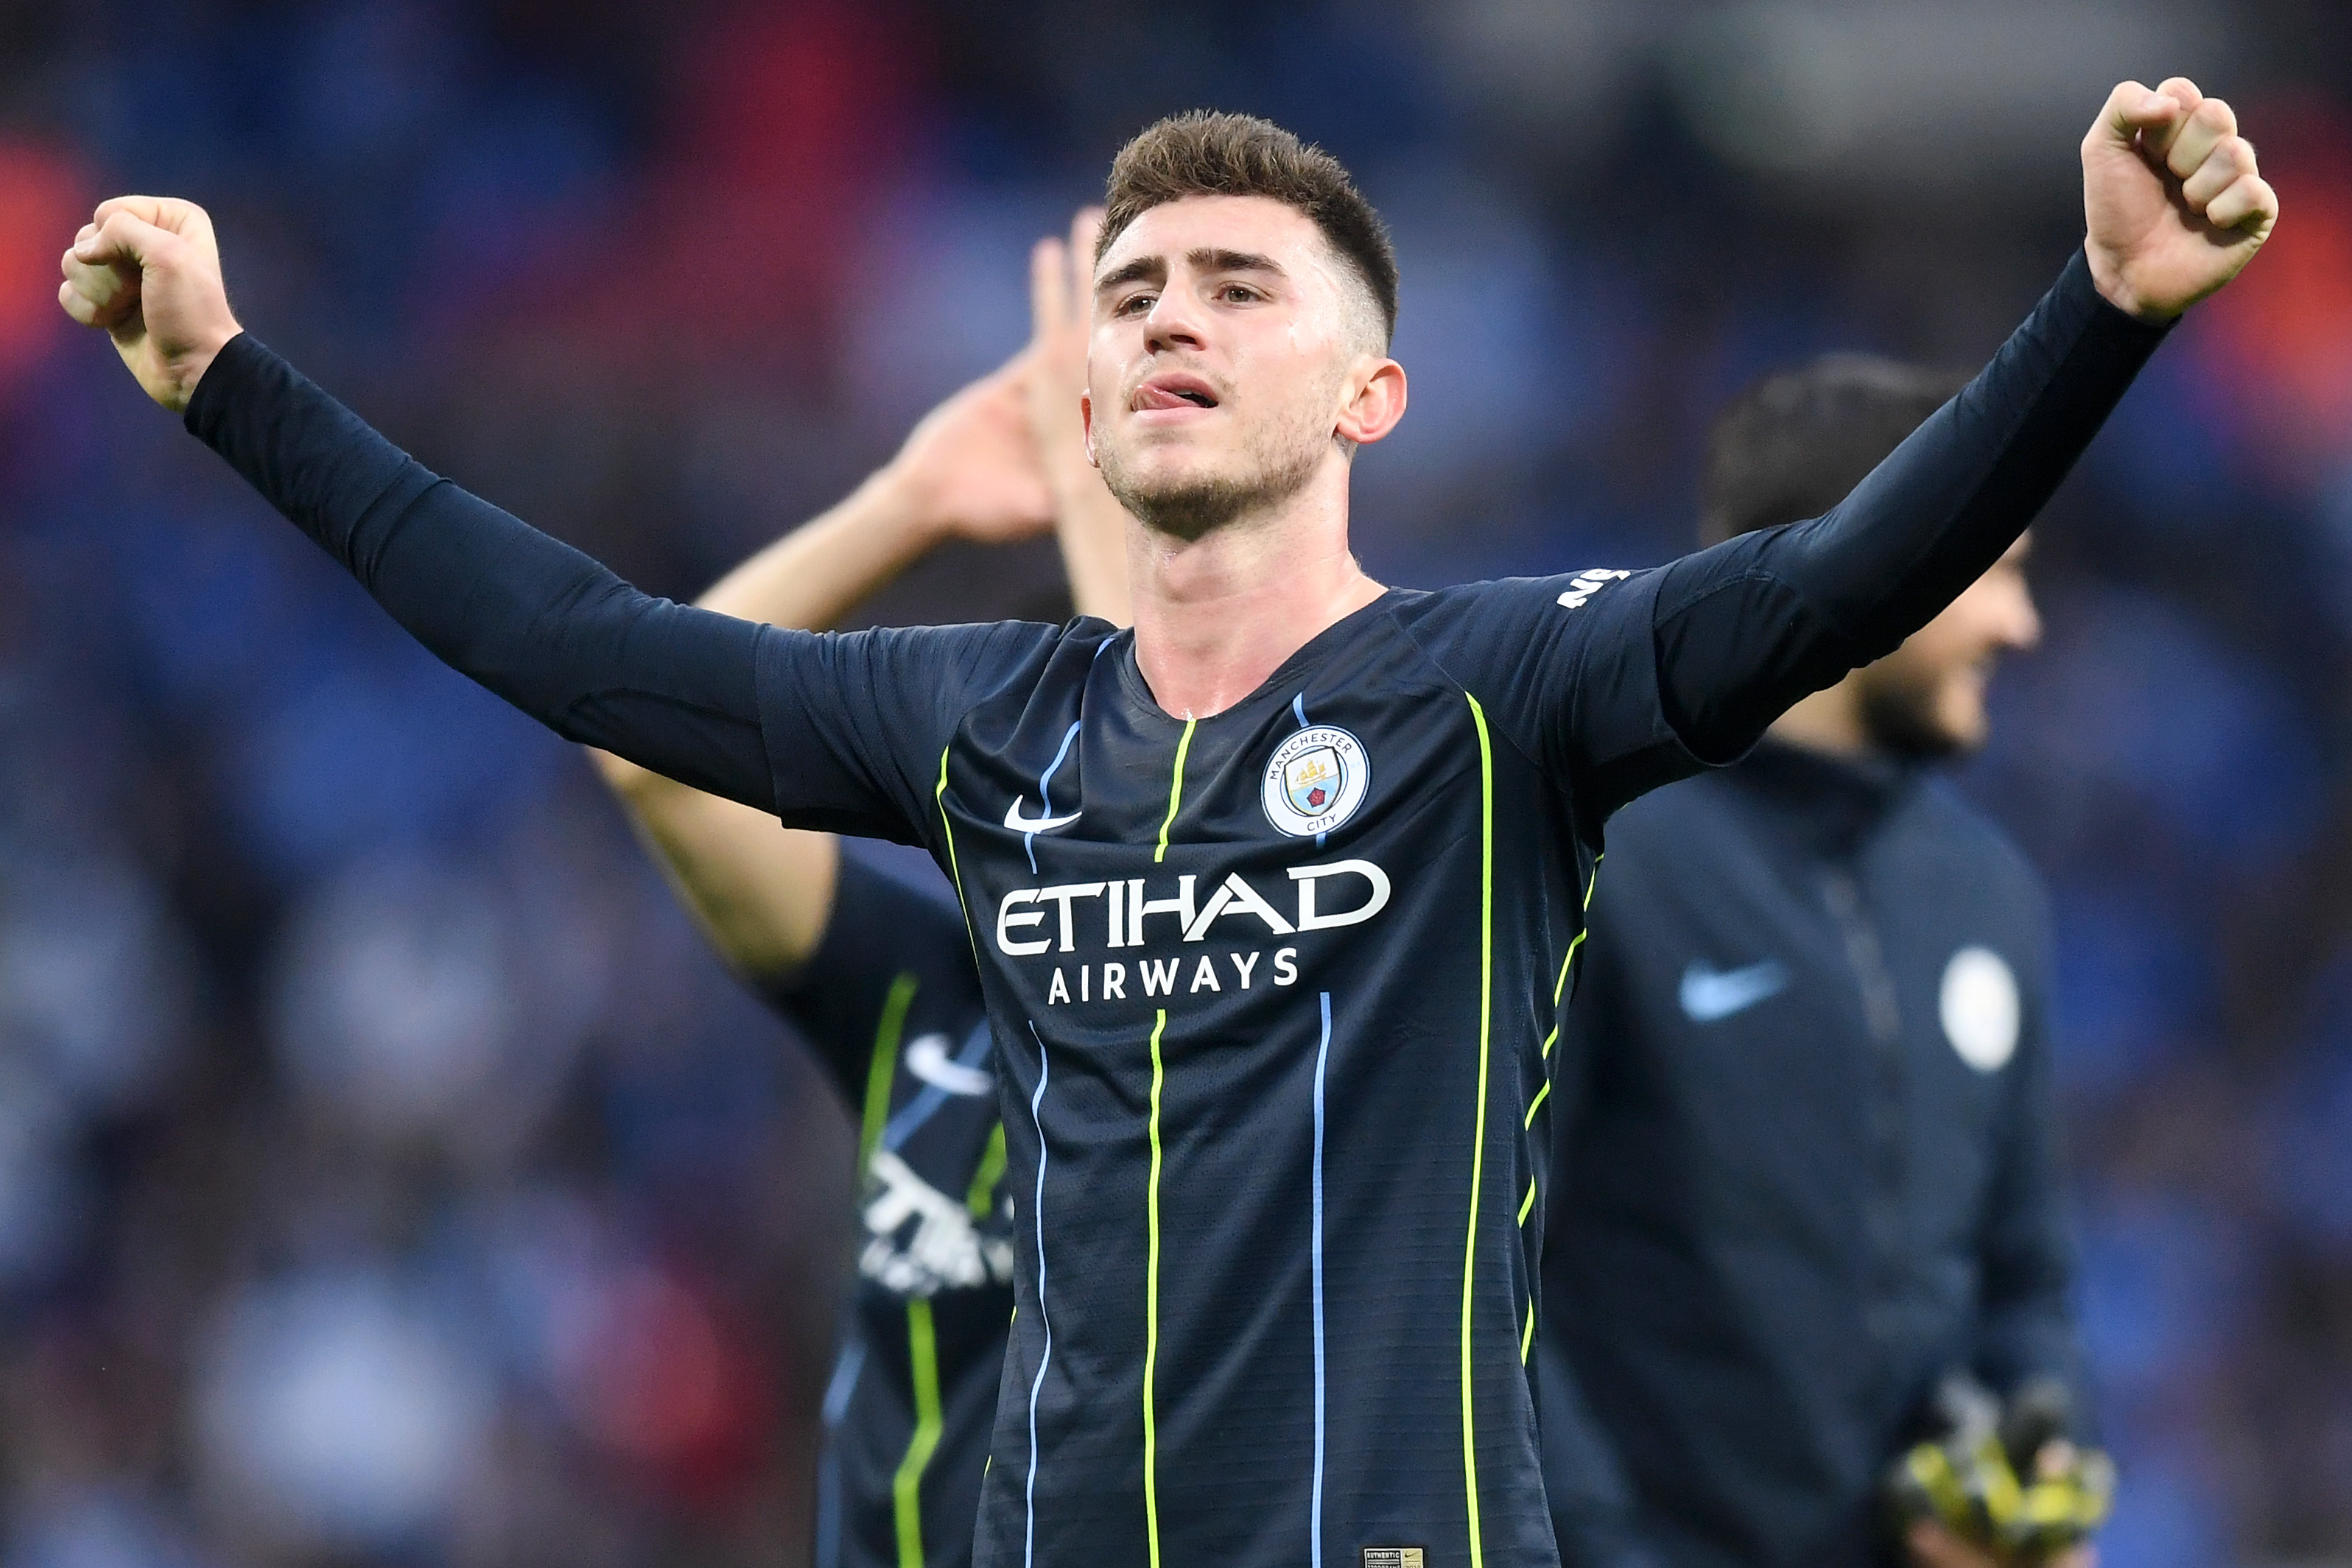 LONDON, ENGLAND - APRIL 06: Aymeric Laporte of Manchester City celebrates victory after the FA Cup Semi Final match between Manchester City  and Brighton and Hove Albion at Wembley Stadium on April 06, 2019 in London, England. (Photo by Michael Regan/Getty Images)